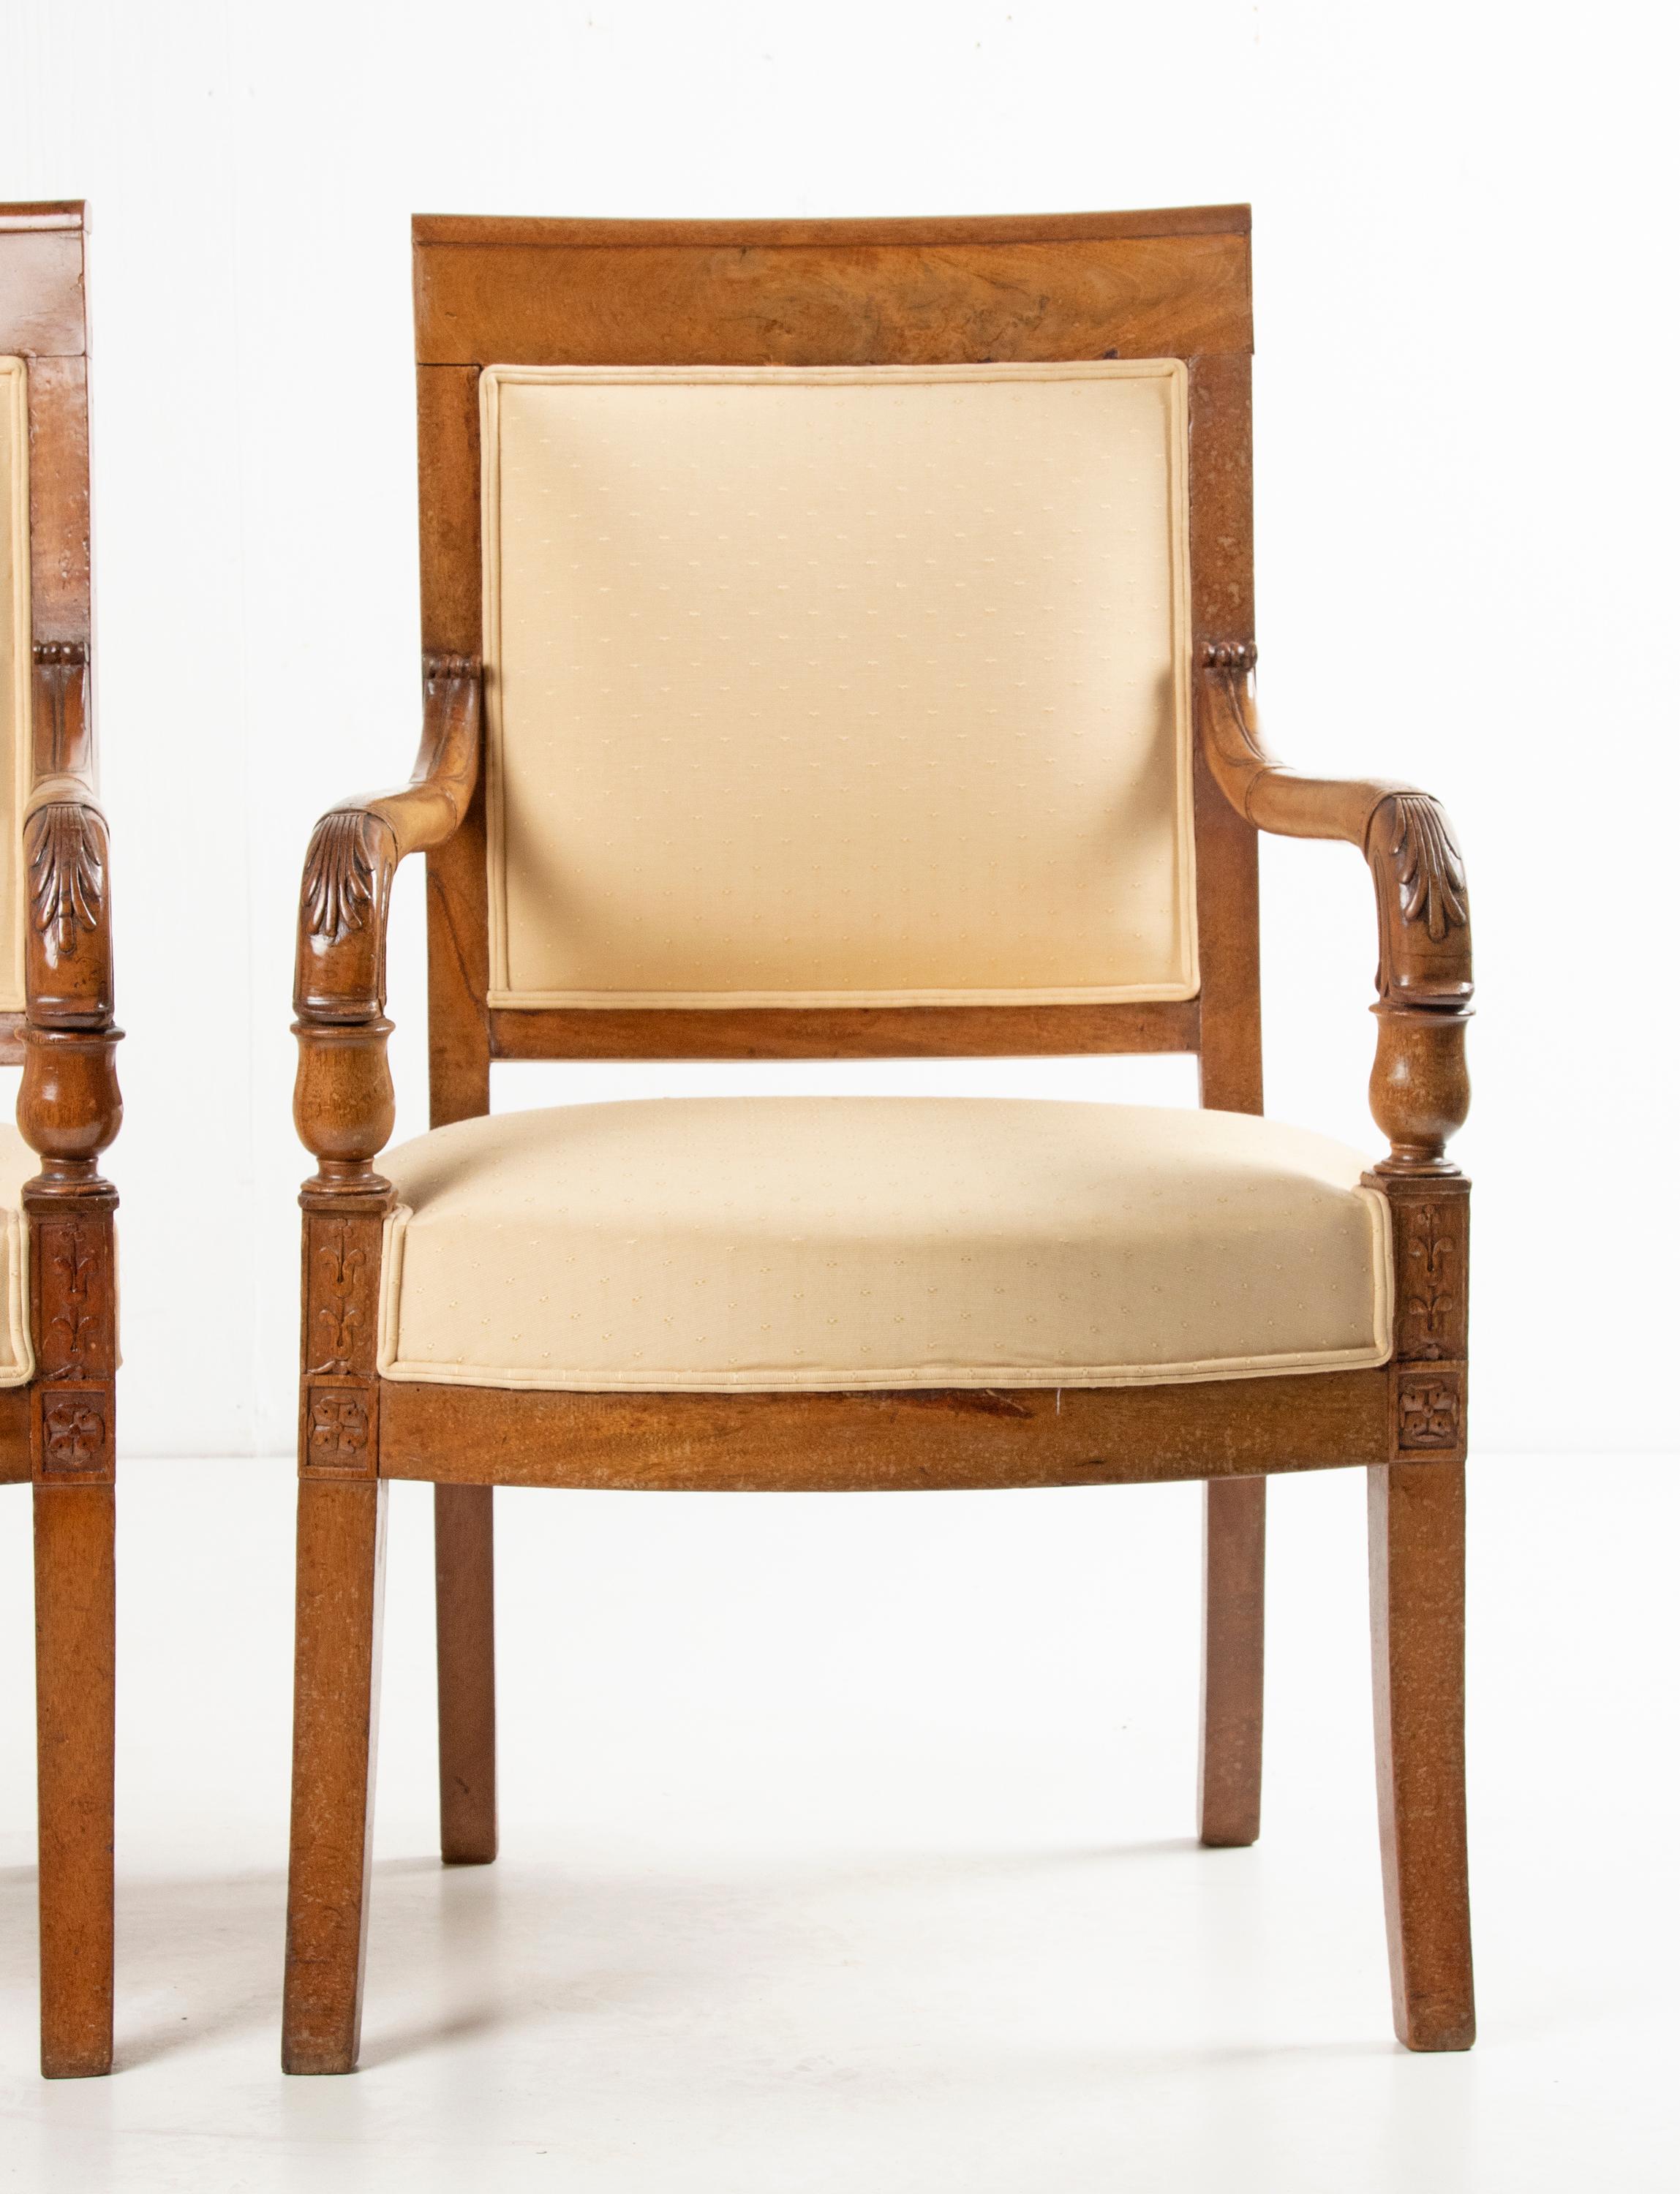 Late 19th Century Empire Mahogany Arm Chairs For Sale 9